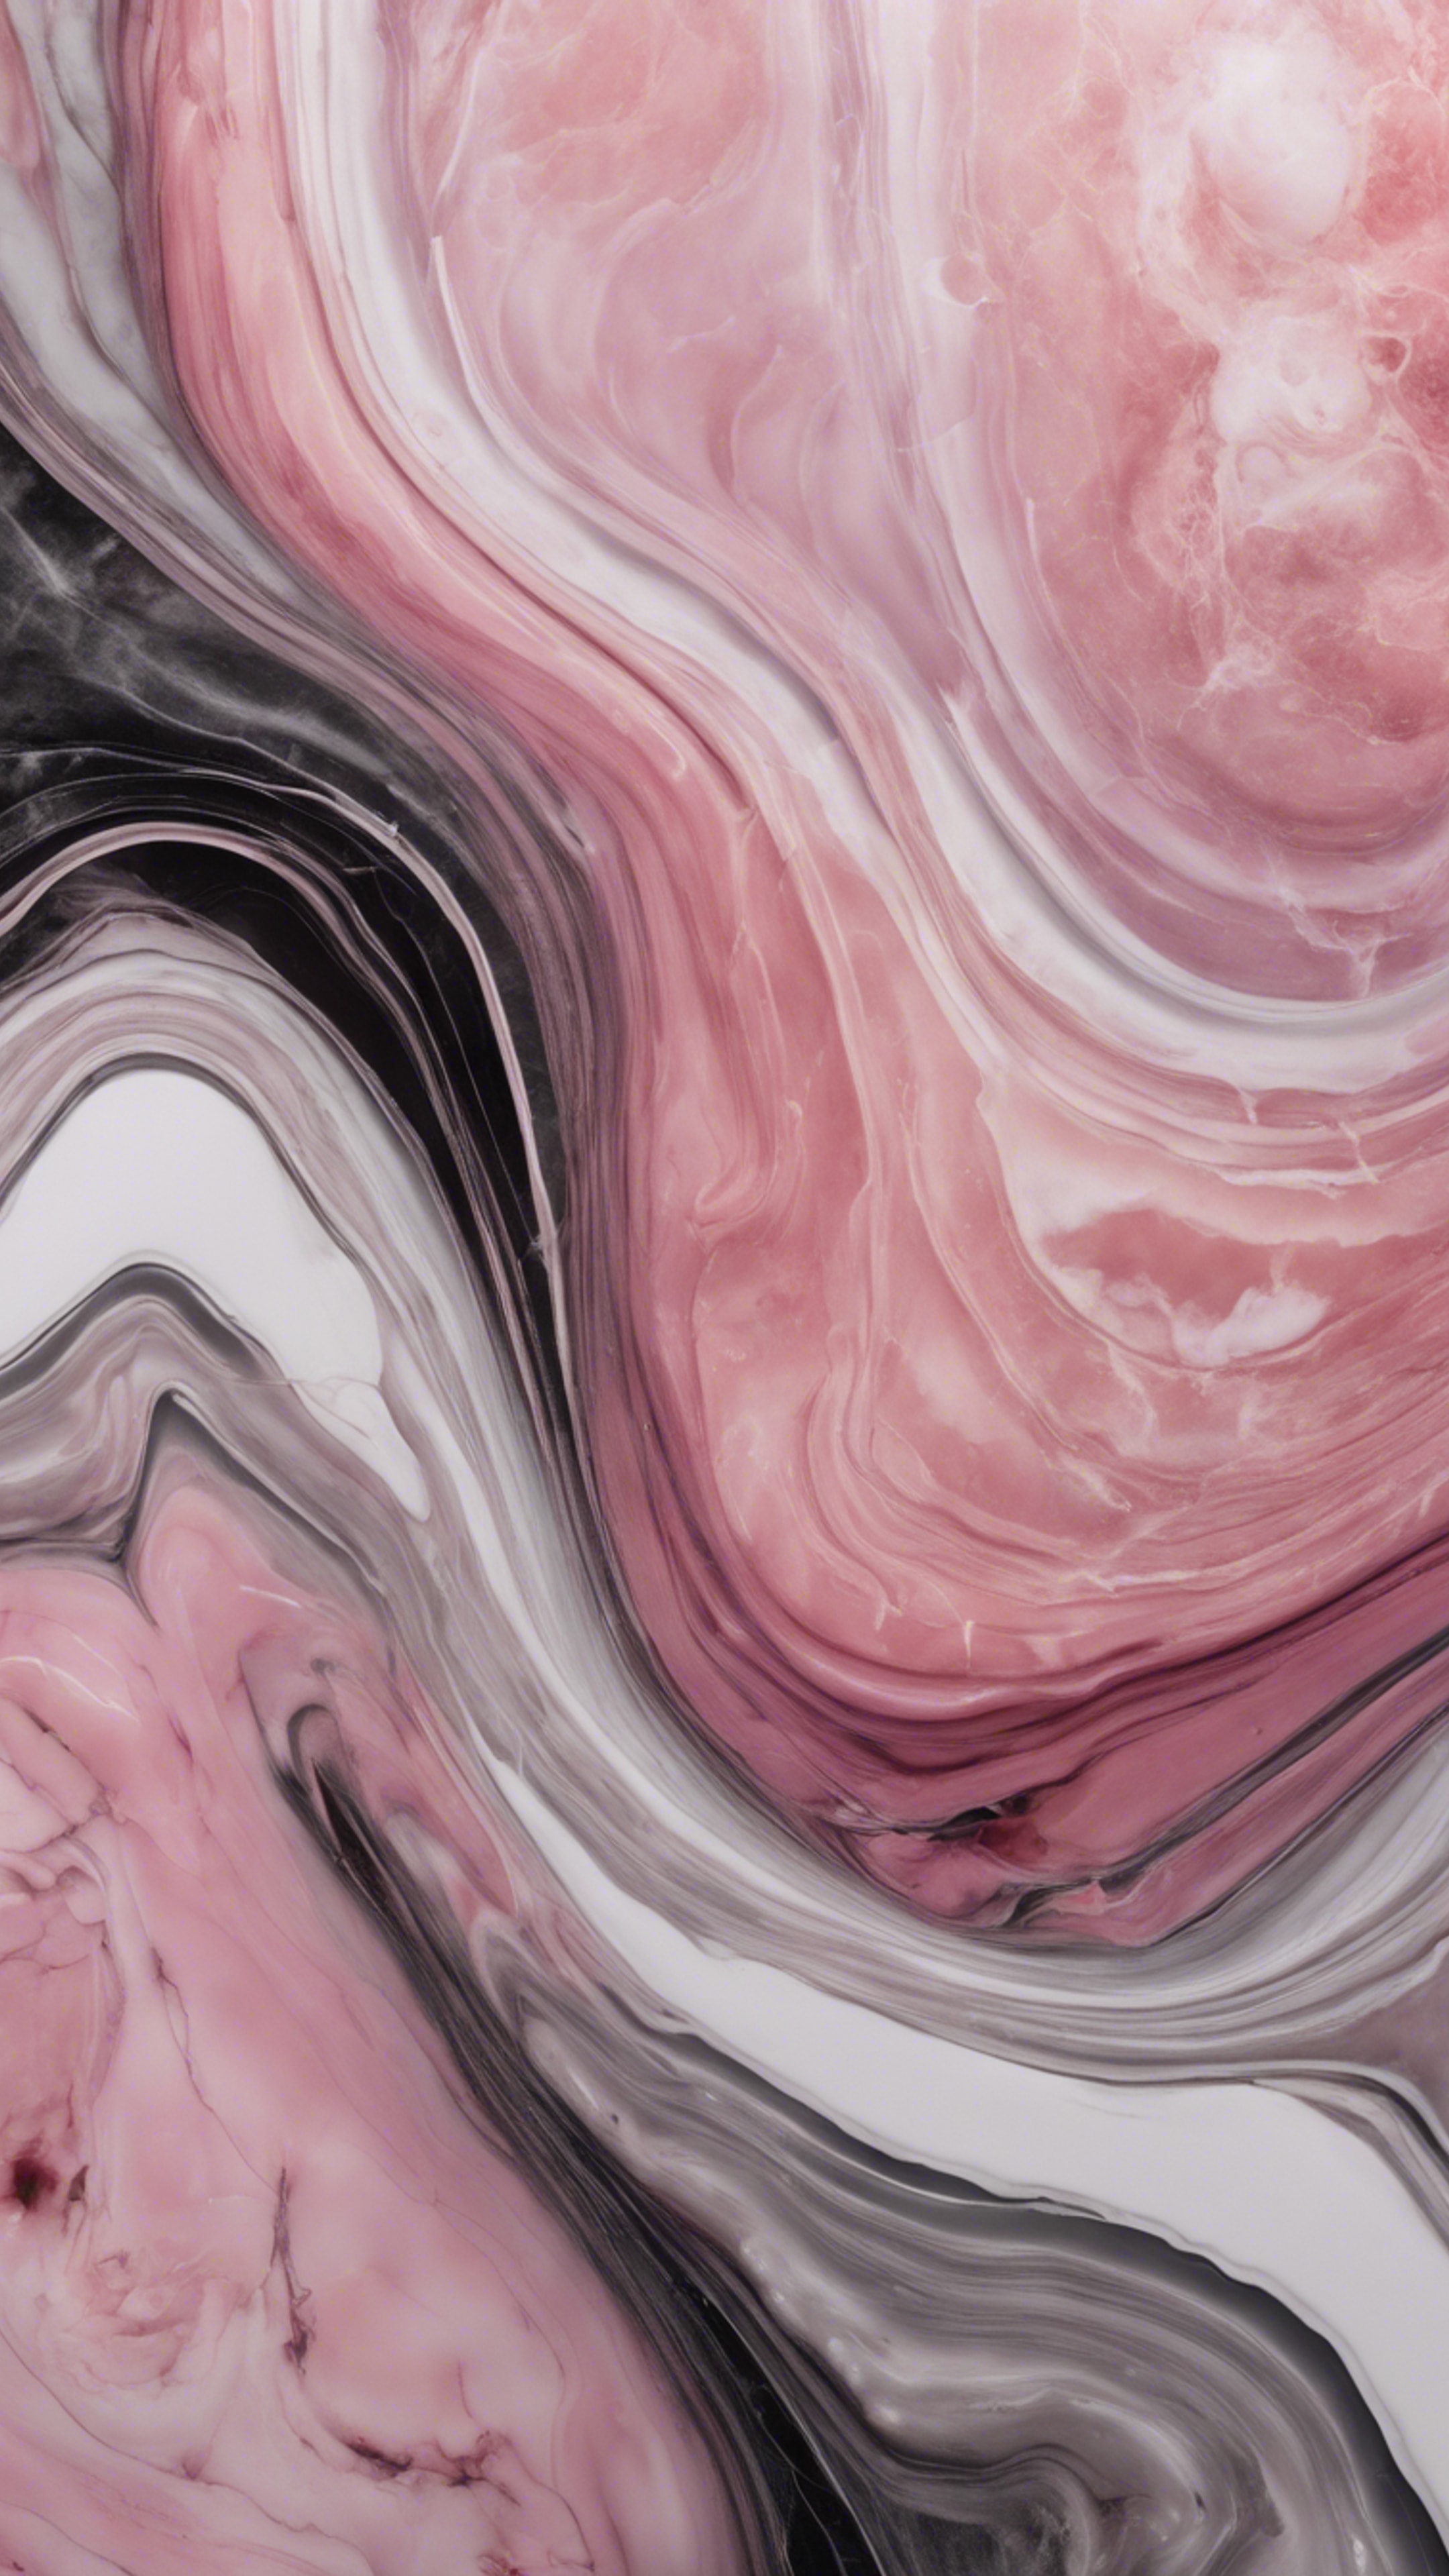 An abstract representation of pink marble, incorporating waves of deep pinks, soft whites, and dark greys. Hintergrund[5ac081f457bf4dc8ac1f]